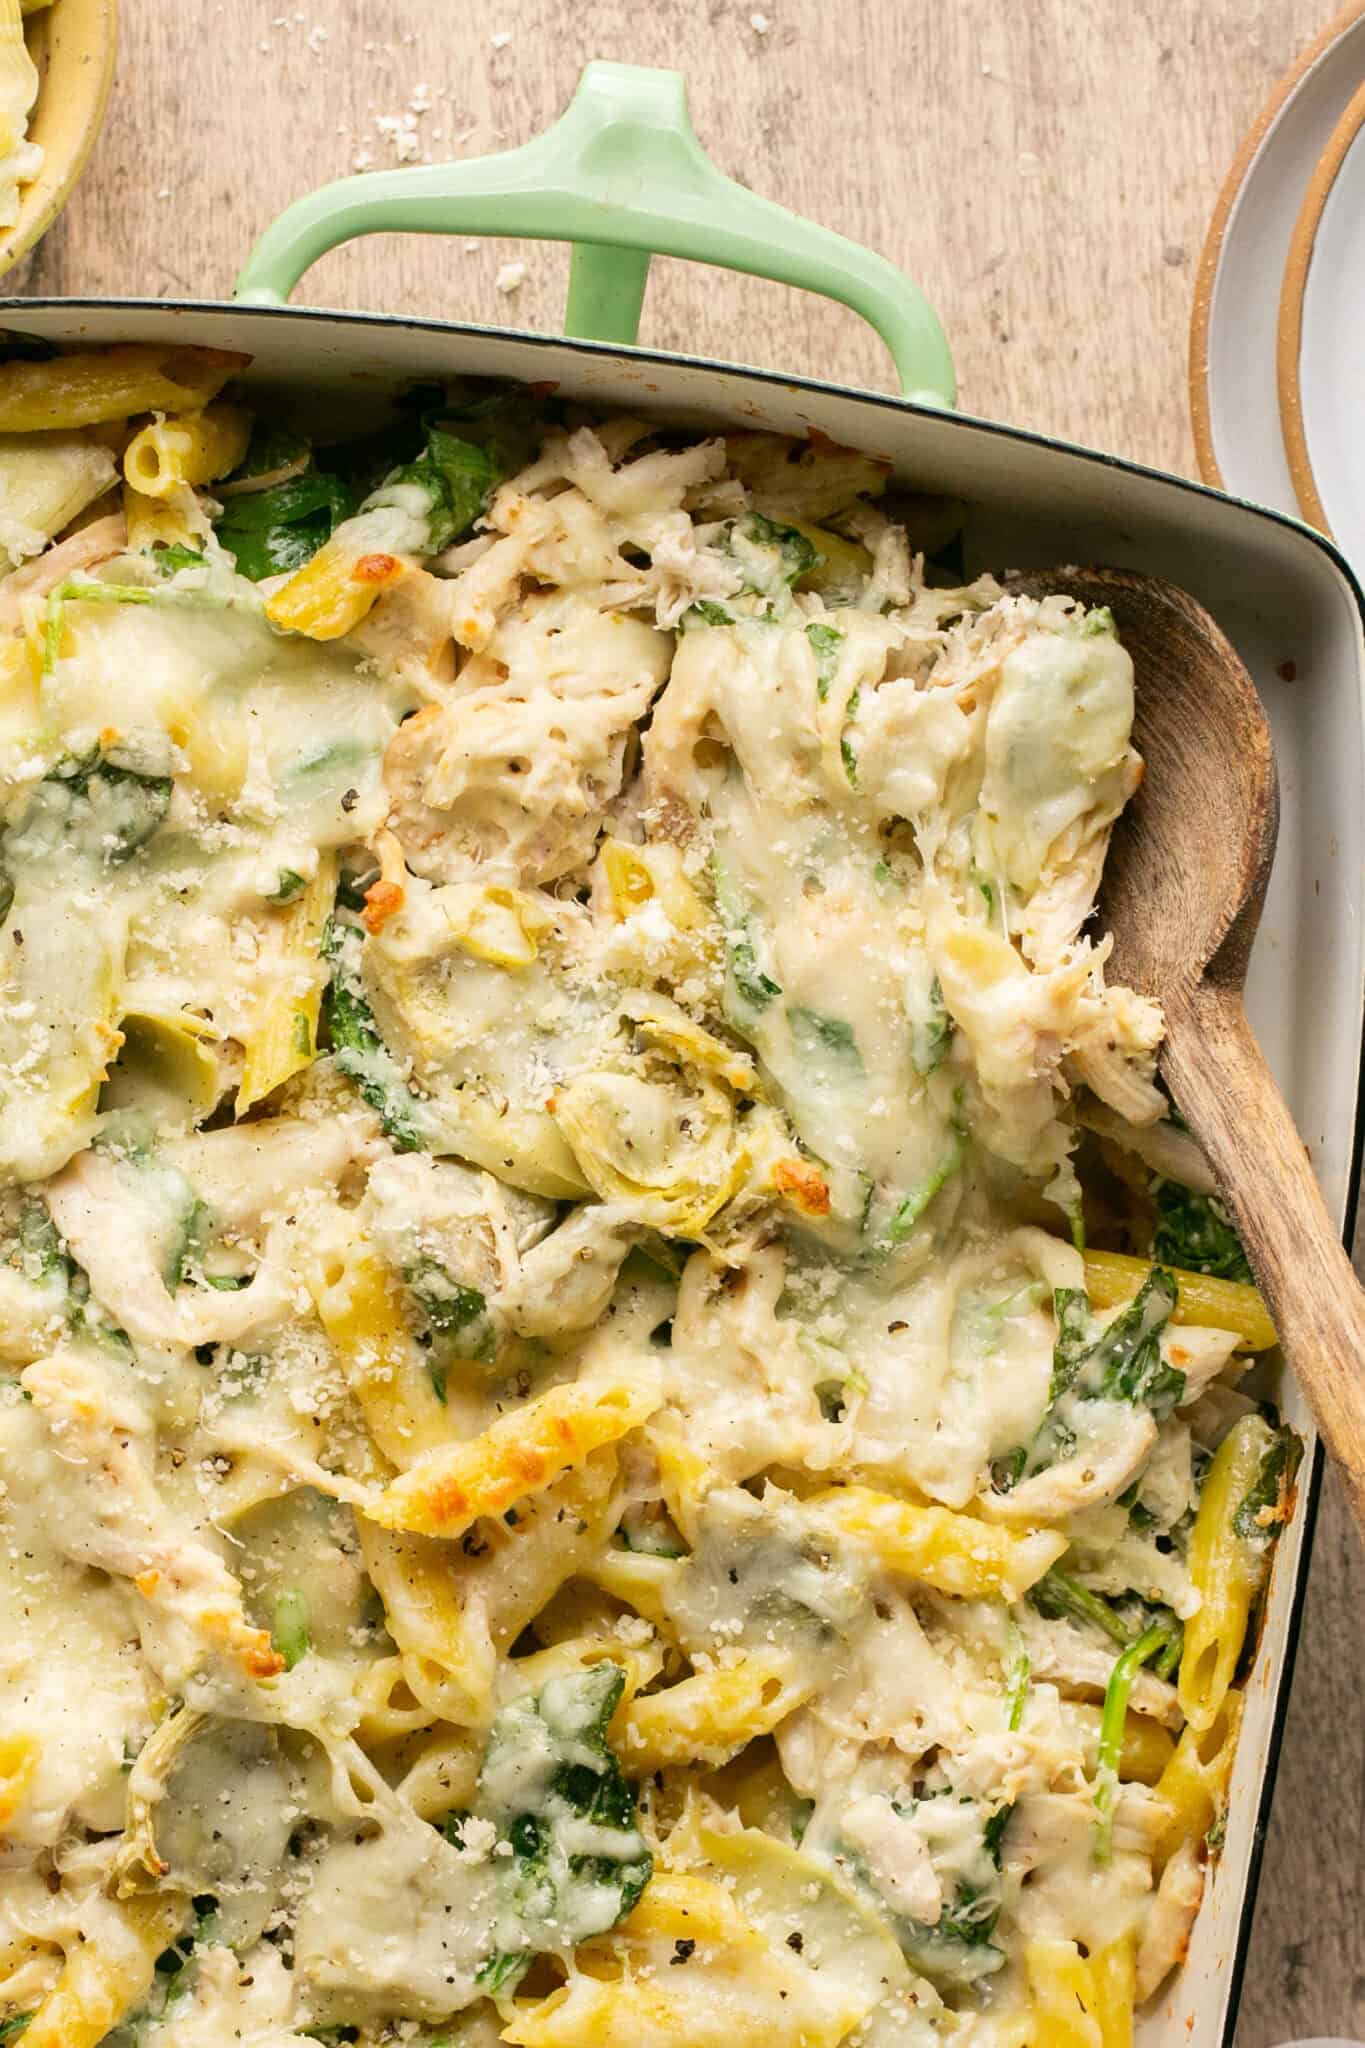 Healthy Spinach and Artichoke Pasta Bake (High Protein!) | Lauren Fit ...